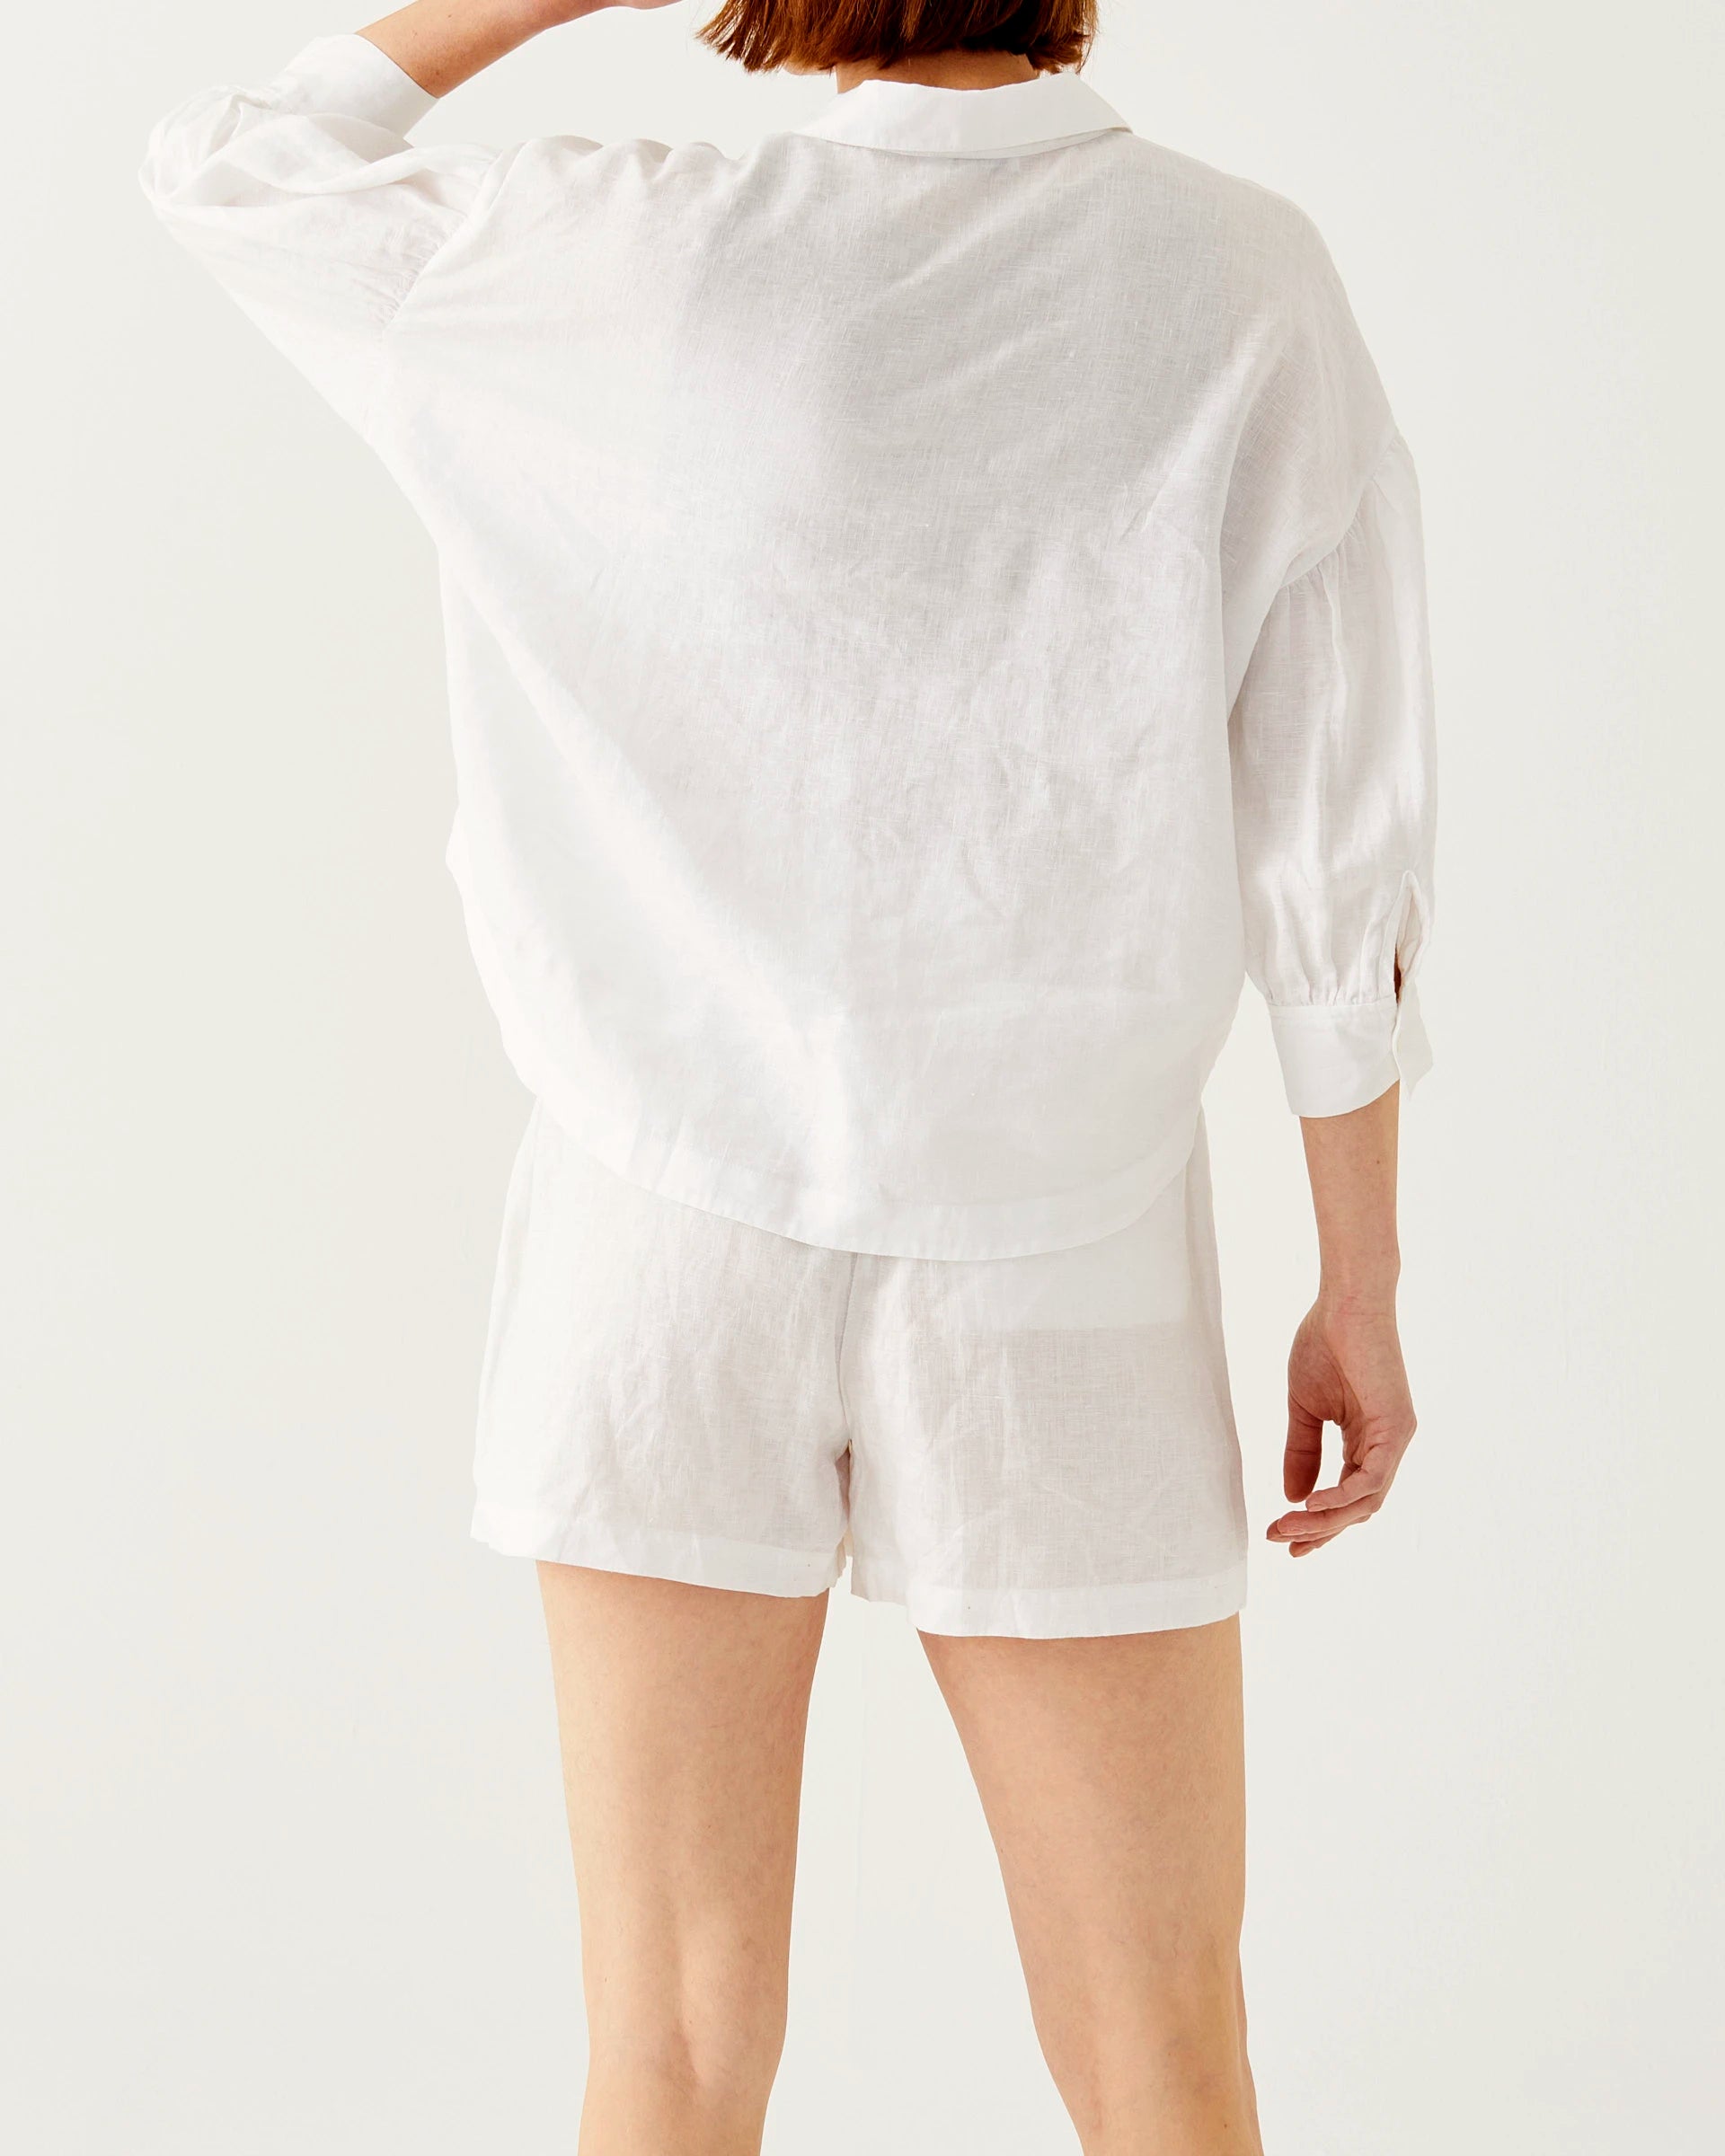 female wearing white linen shorts with belt and matching top backwards on a white background